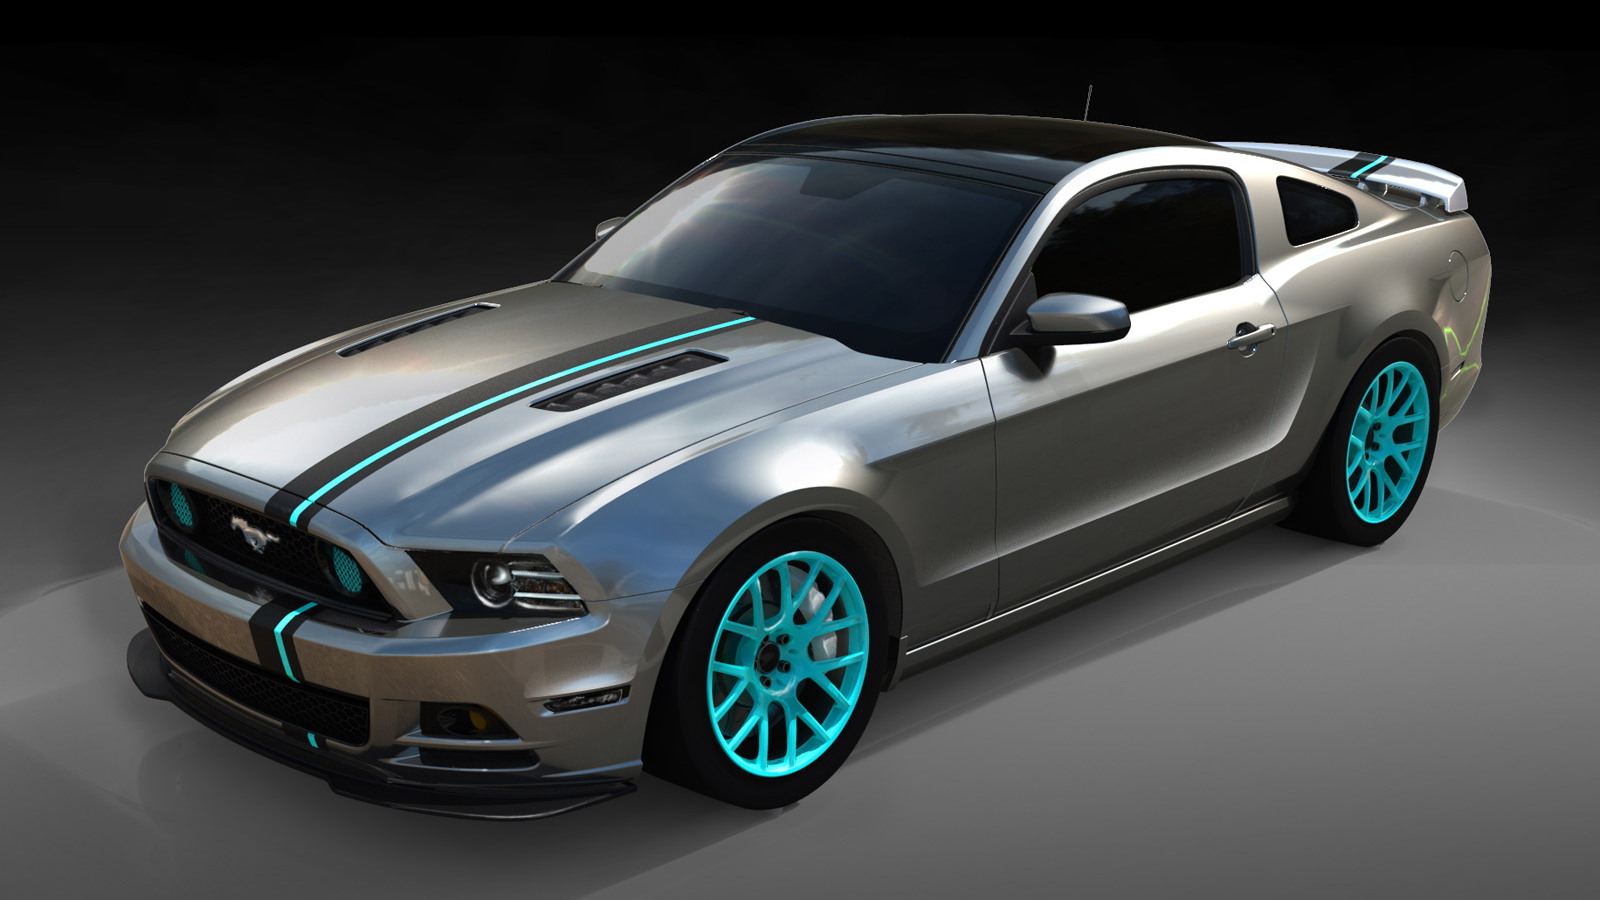 2012 SEMA Mustang Build: Chromatic Exterior by Jennifer Seely